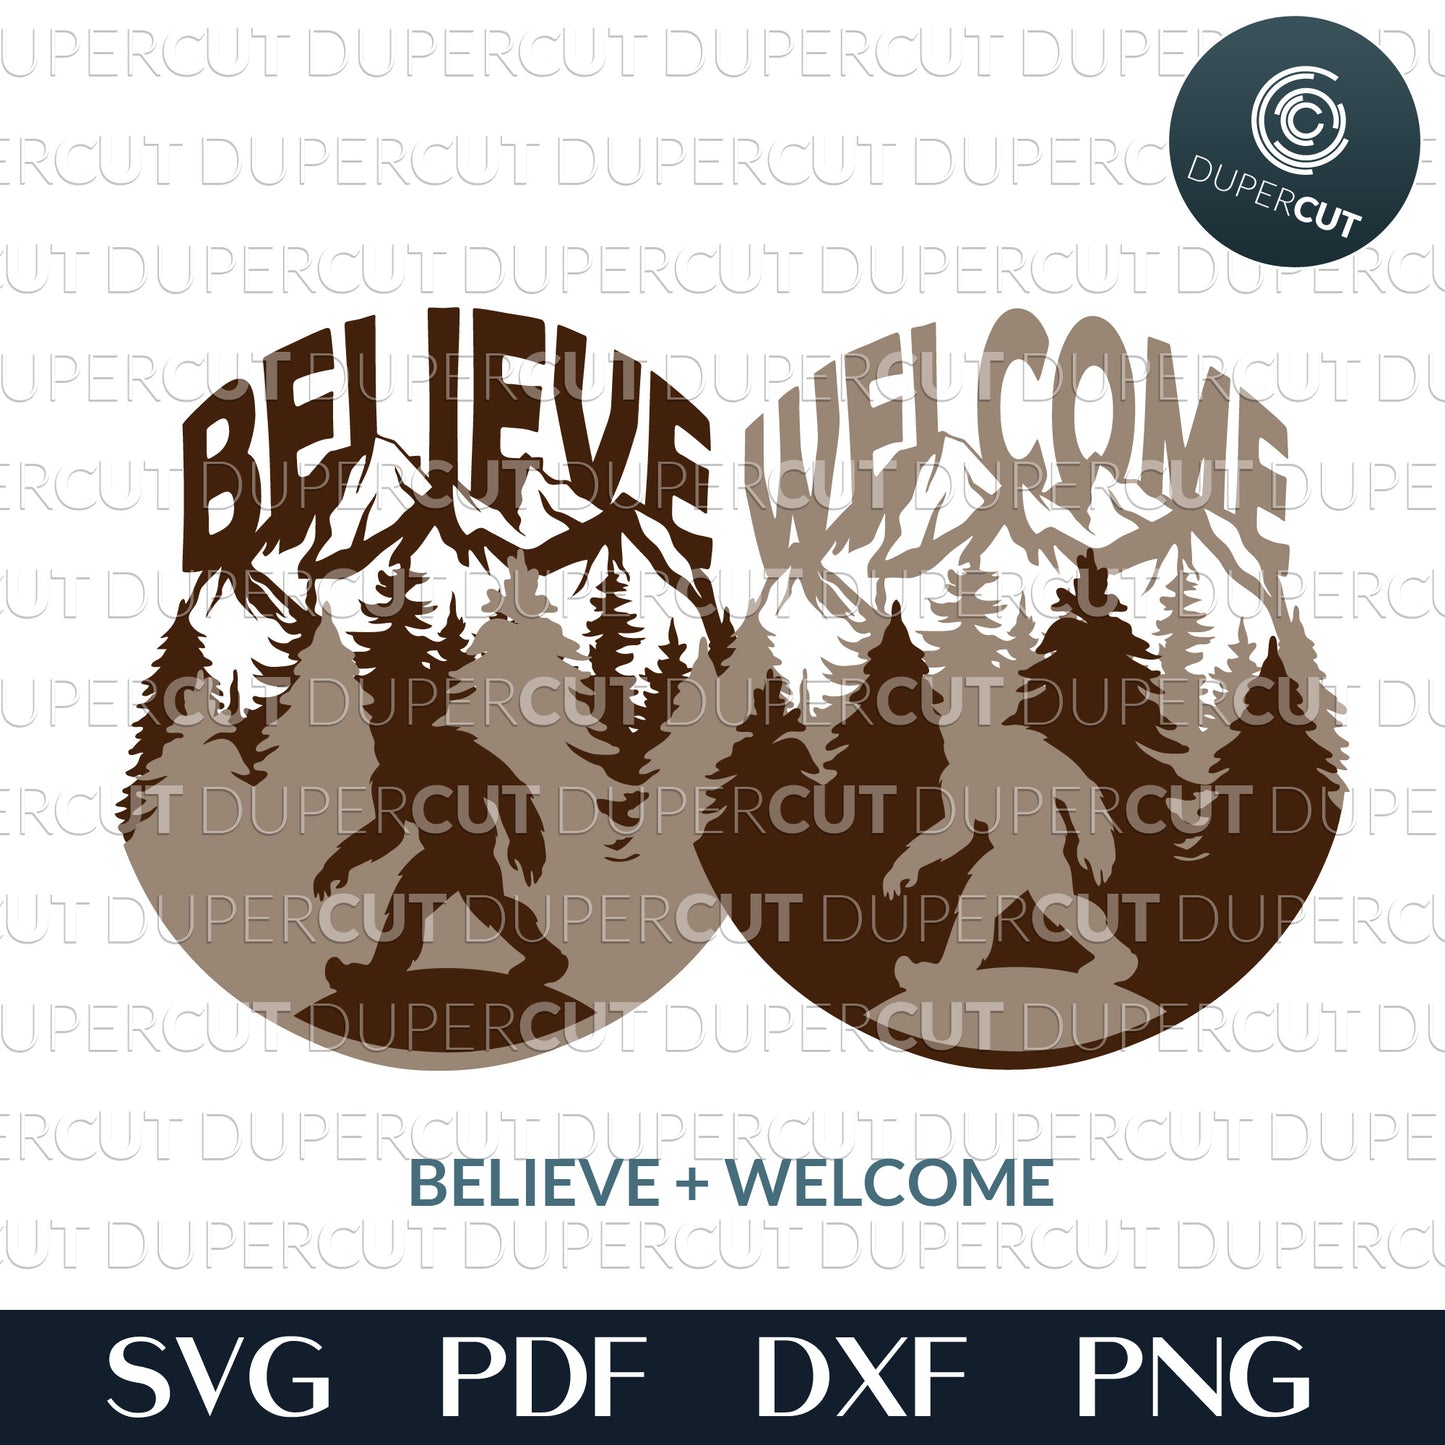 Bigfoot yeti BELIEVE sign - layered laser cutting files SVG PDF DXF templates for commercial use. Glowforge, Cricut, Silhouette Cameo, CNC plasma machines